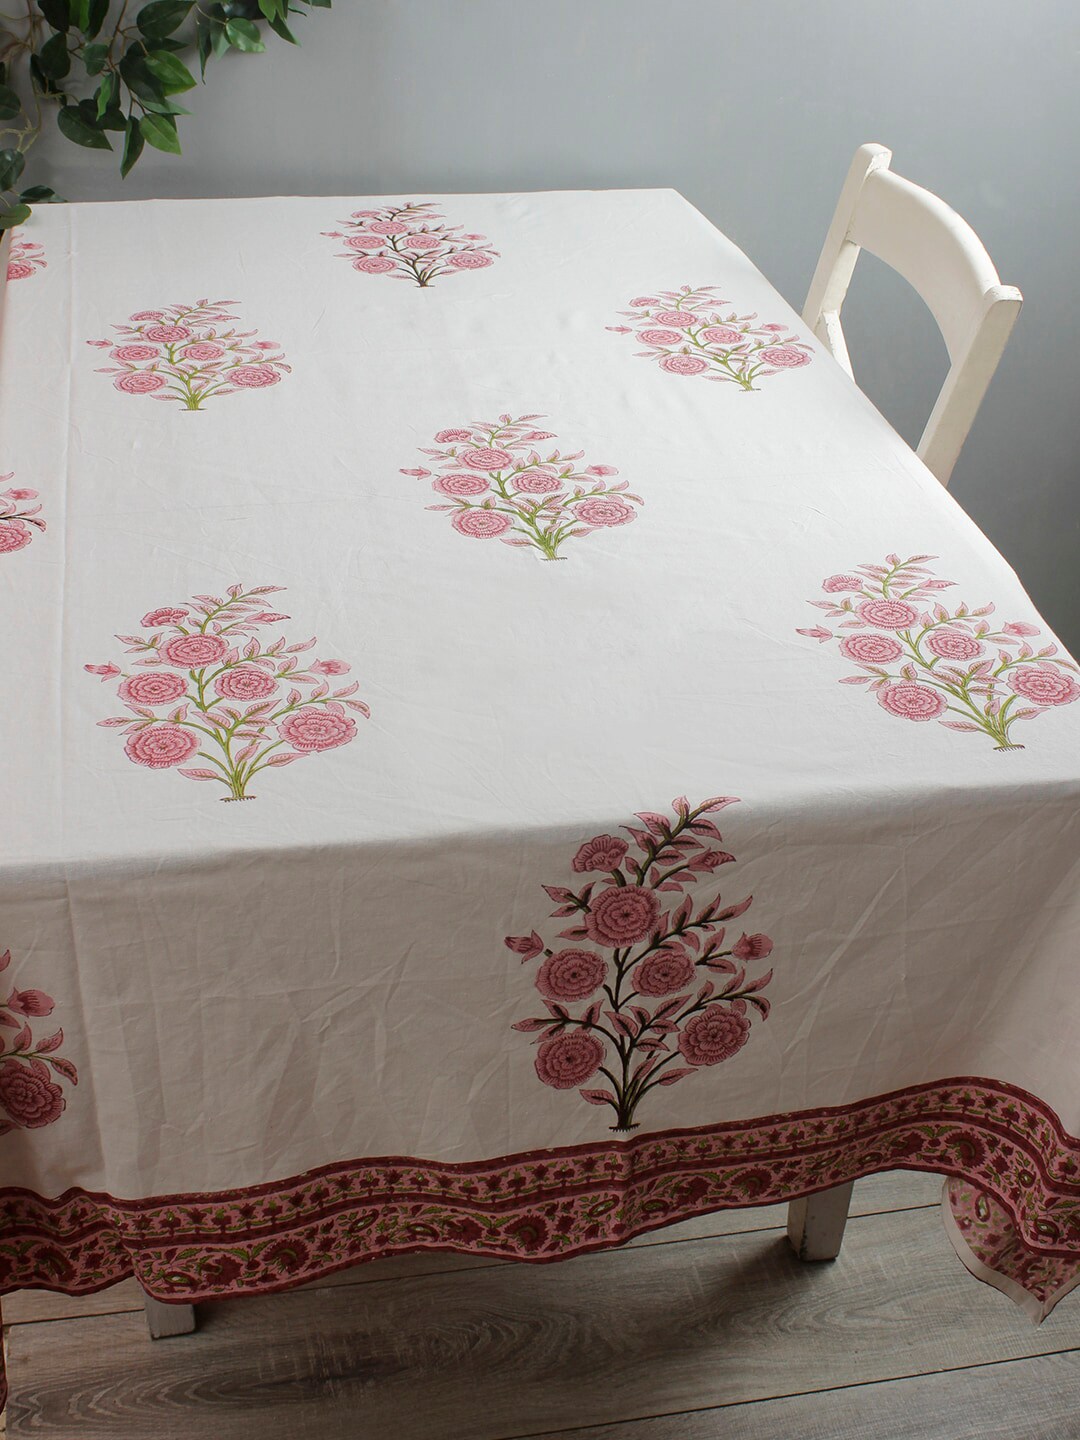 Rajasthan Decor White & Pink Floral Printed 6-Seater Table Cover Price in India